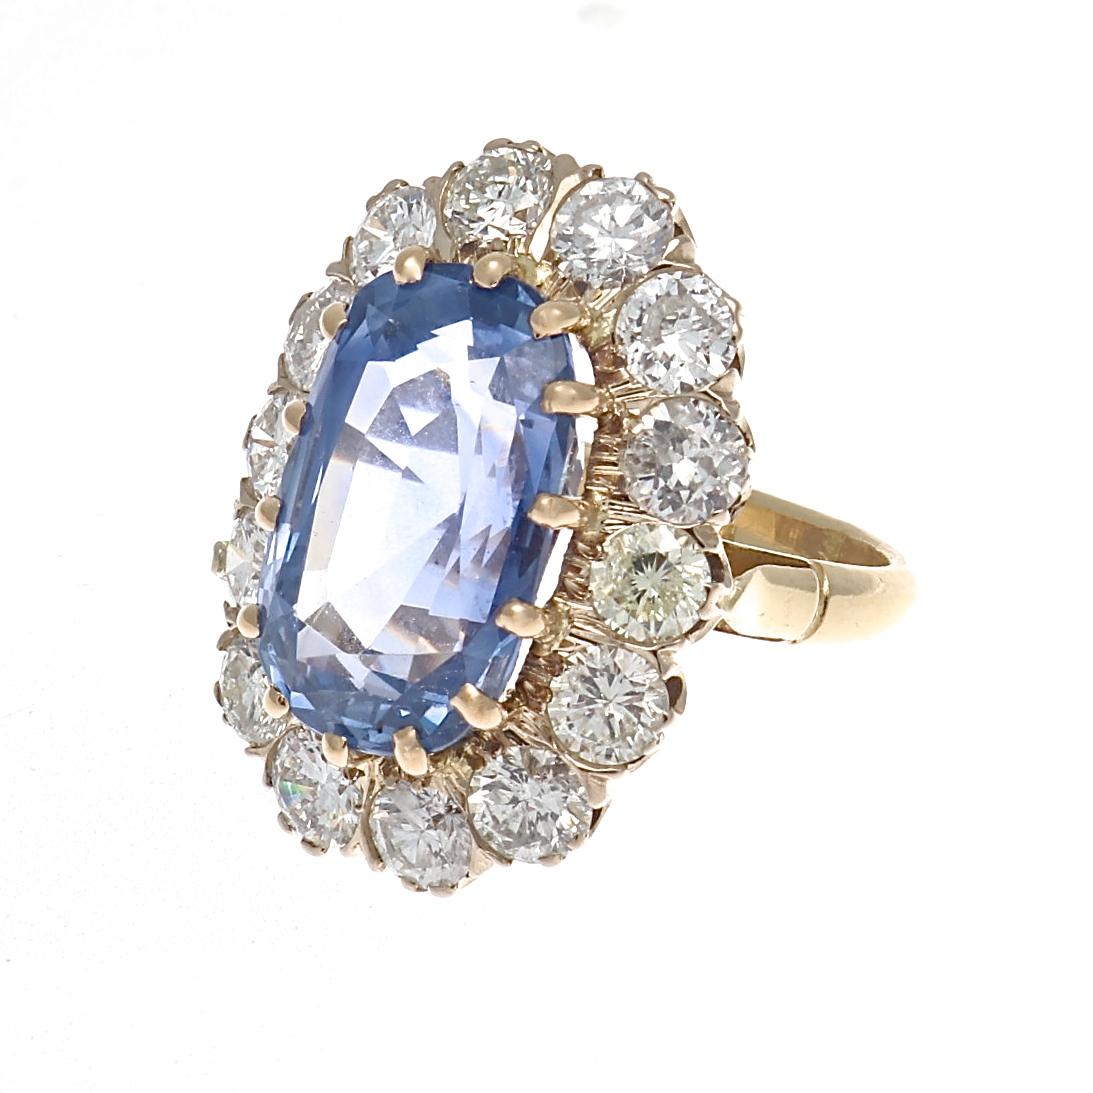 Dream ring found!  Featuring a heavenly cornflower blue faceted oval 10.23 carat GIA certified, natural Ceylon sapphire that has no indications of heat treatment. The surrounding halo of lively white round diamonds weigh approximately 2.80 carats.